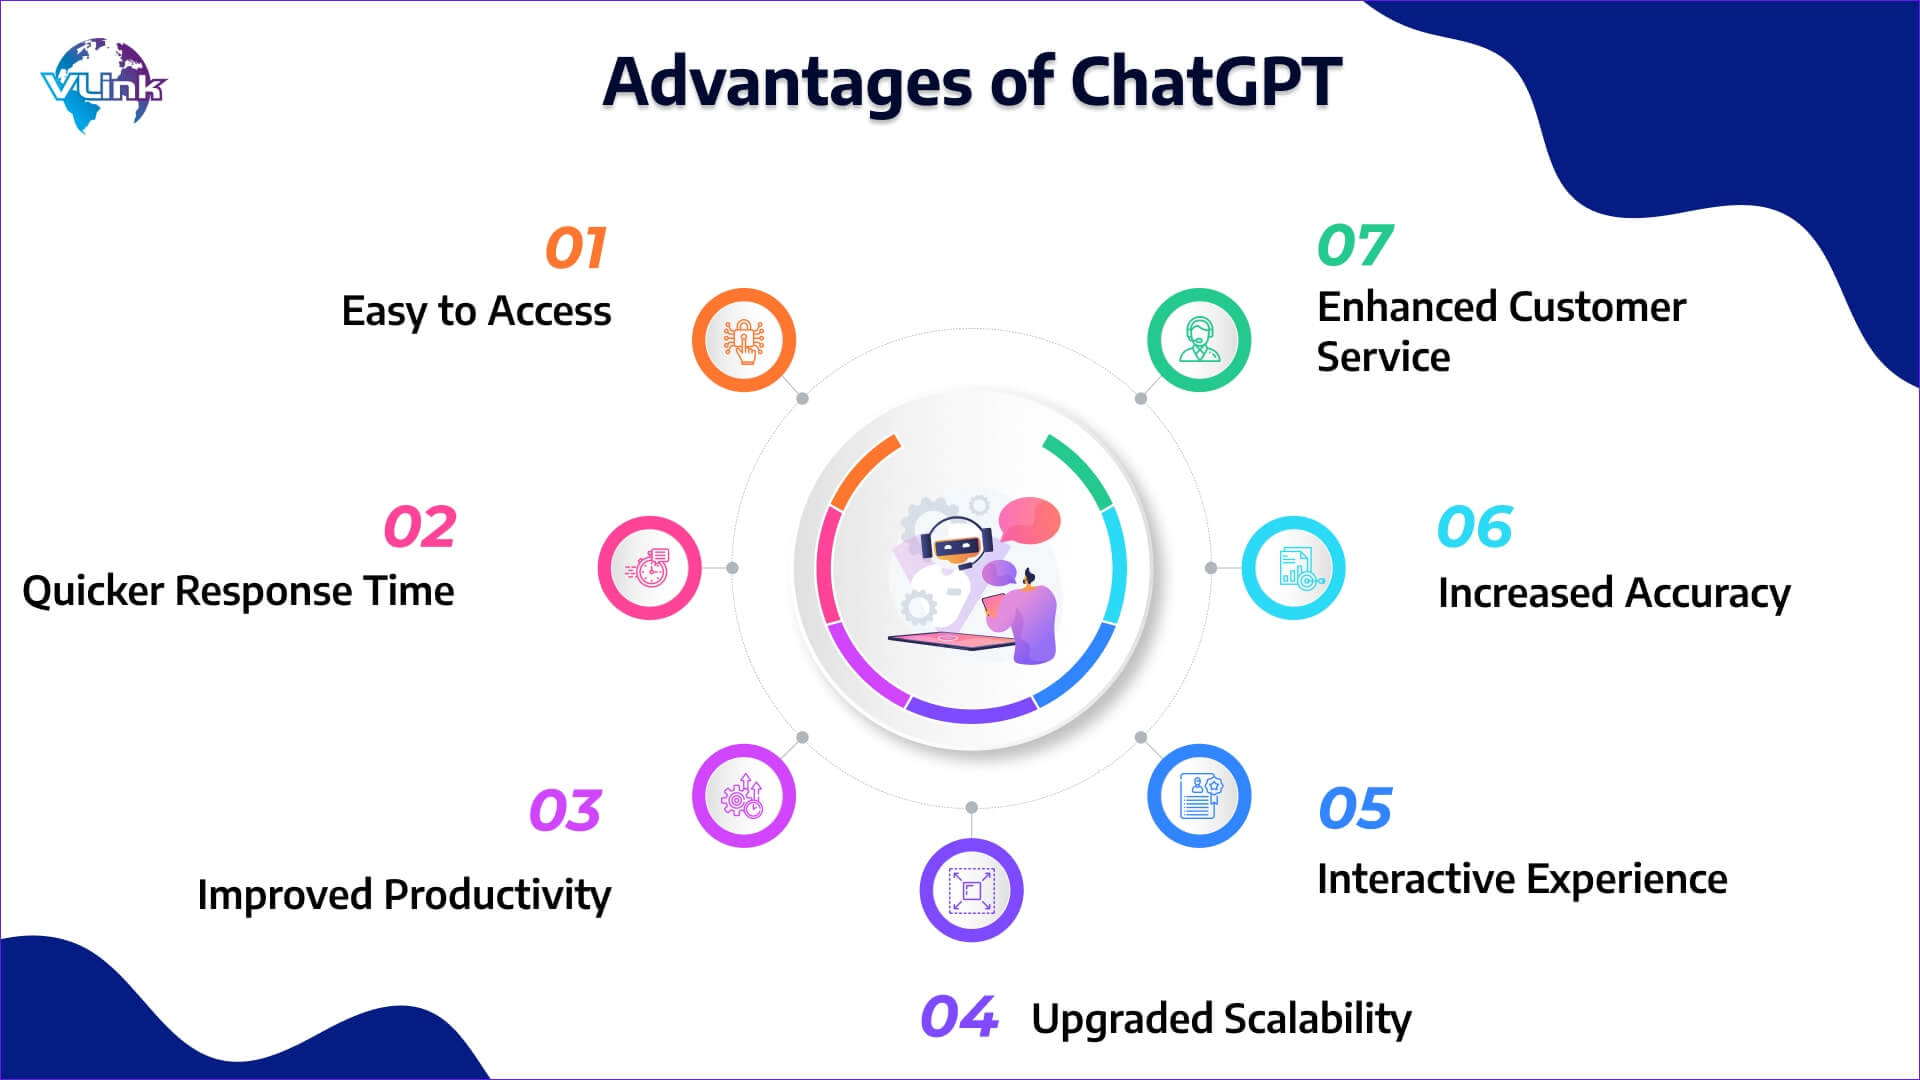 What are the Advantages of ChatGPT 